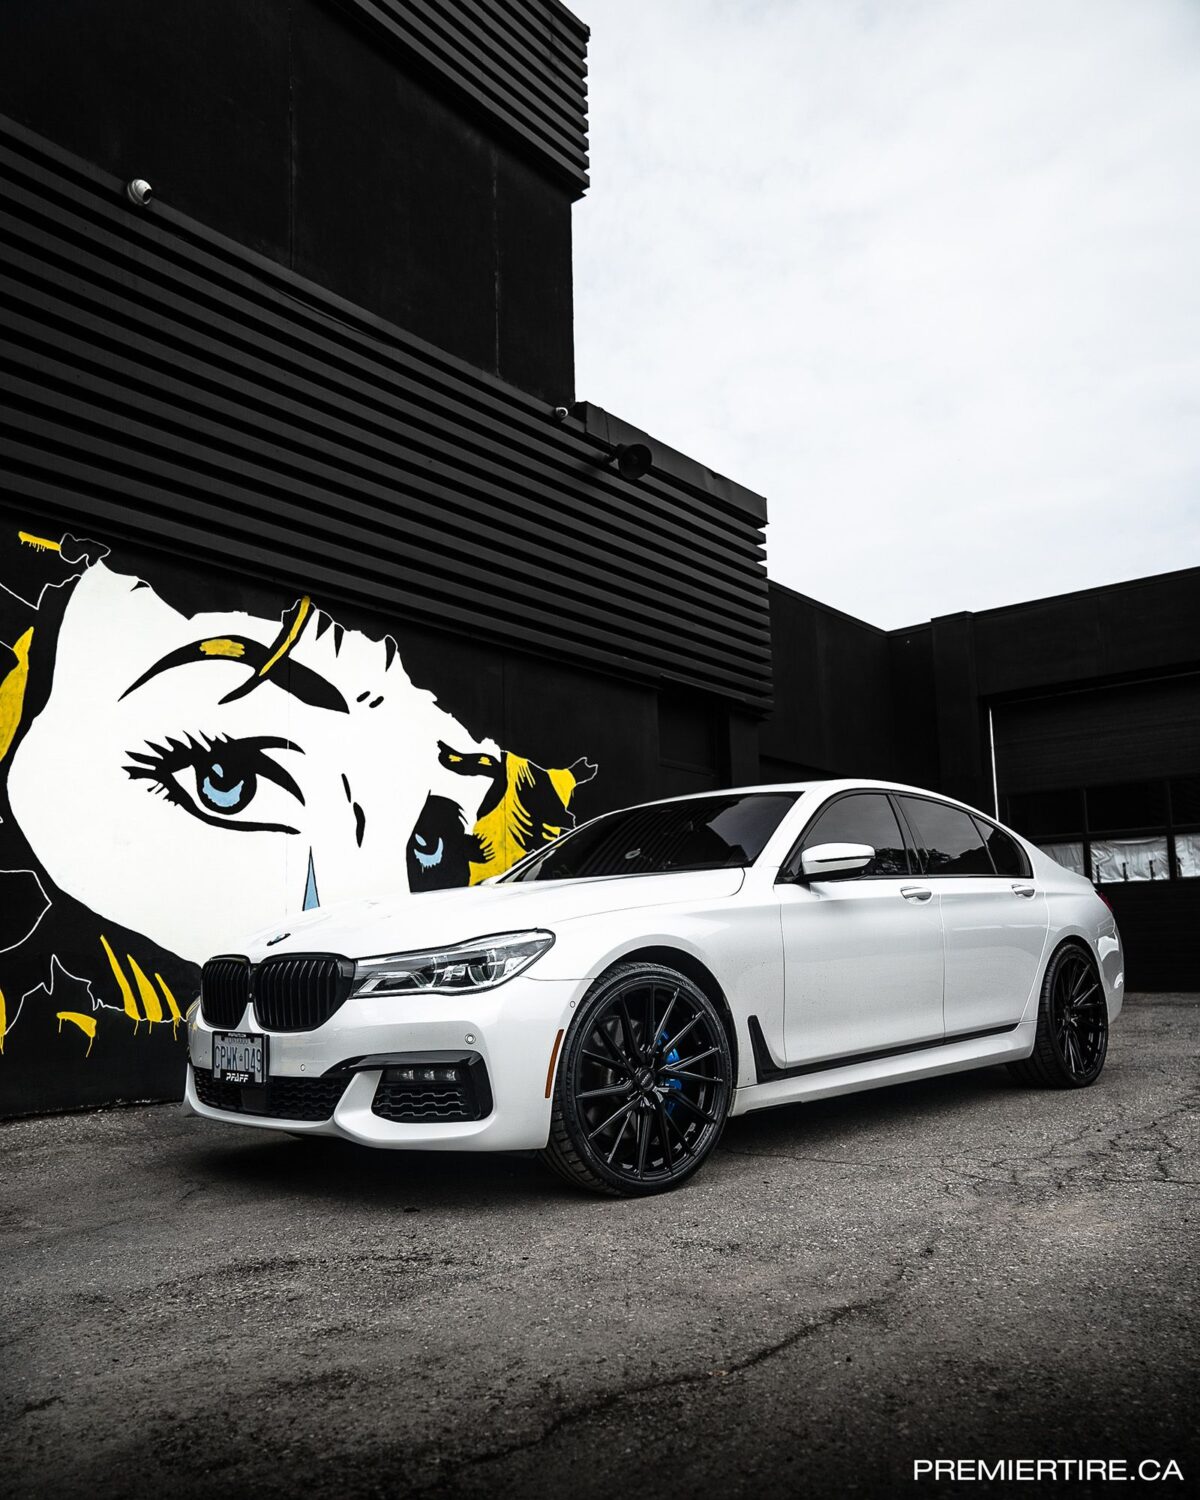 BMW 7 Series G11/G12 with 22×9 and 22×10.5-inch Vossen HF-4T
